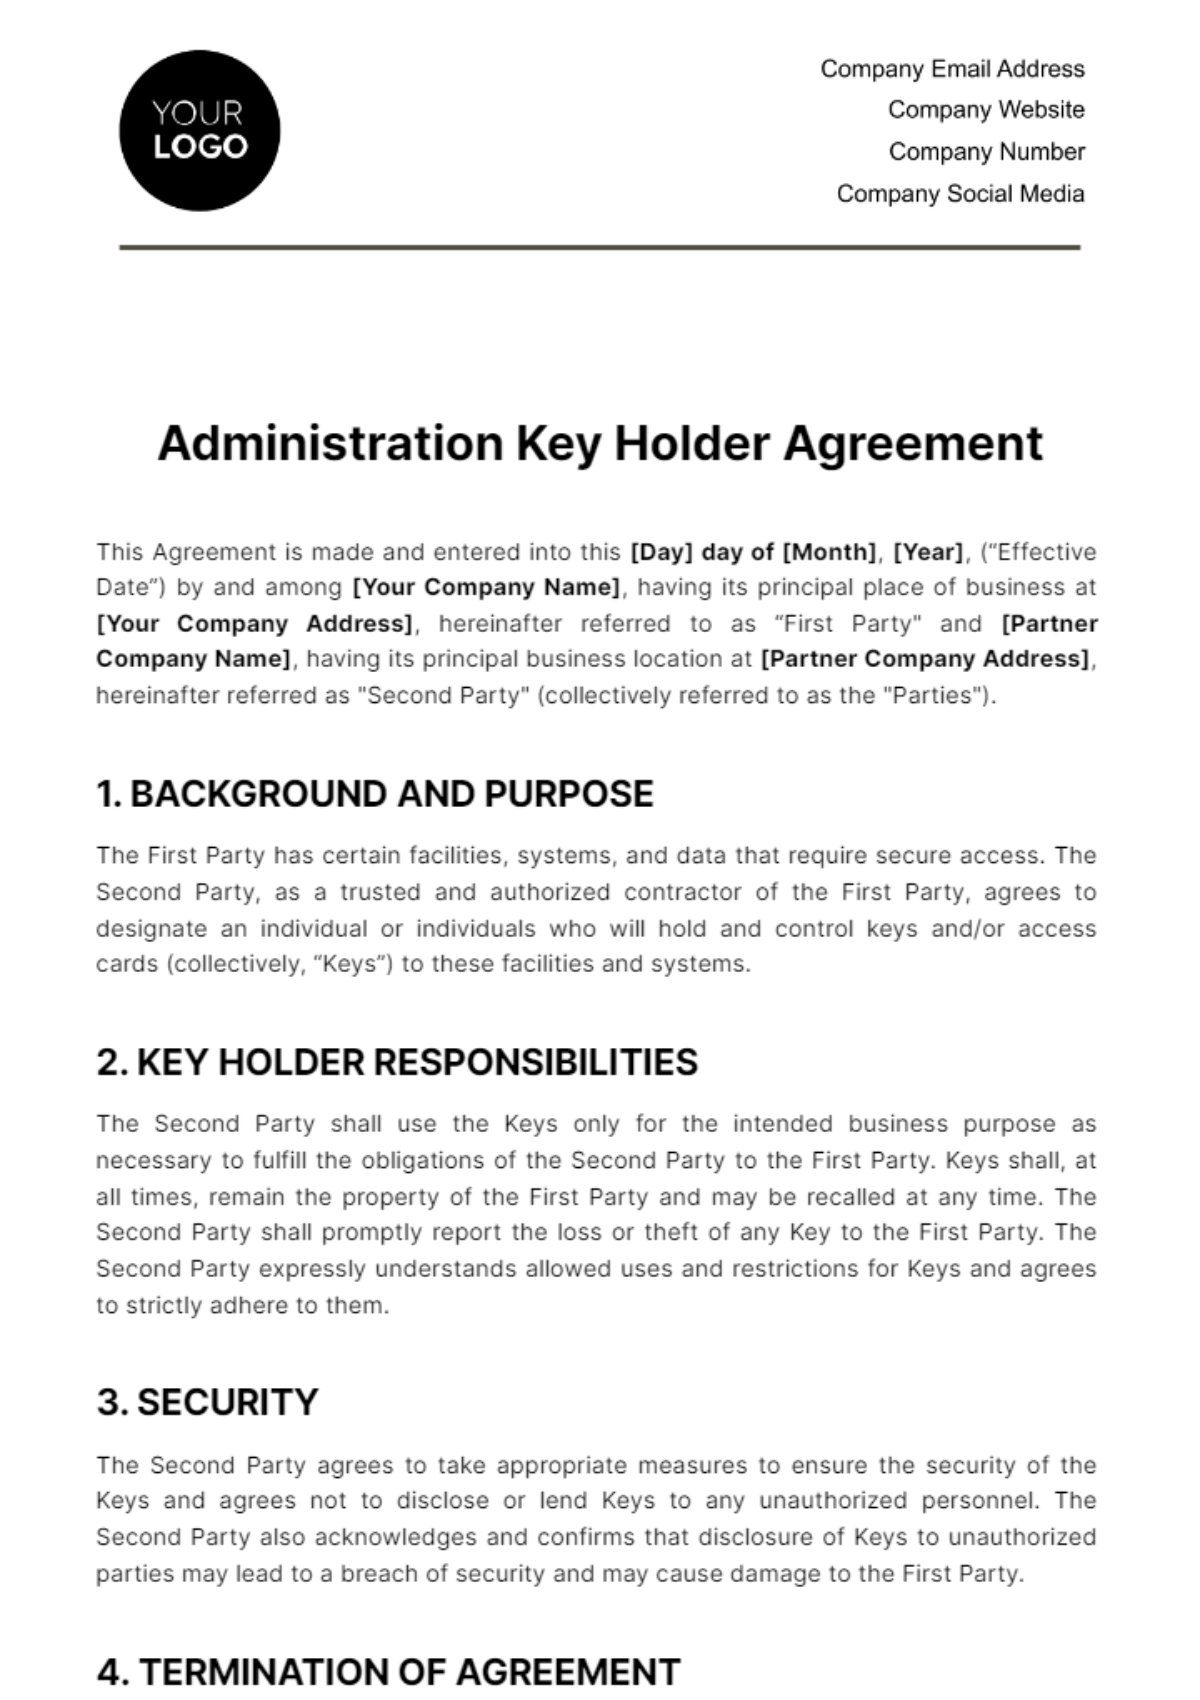 Administration Key Holder Agreement Template